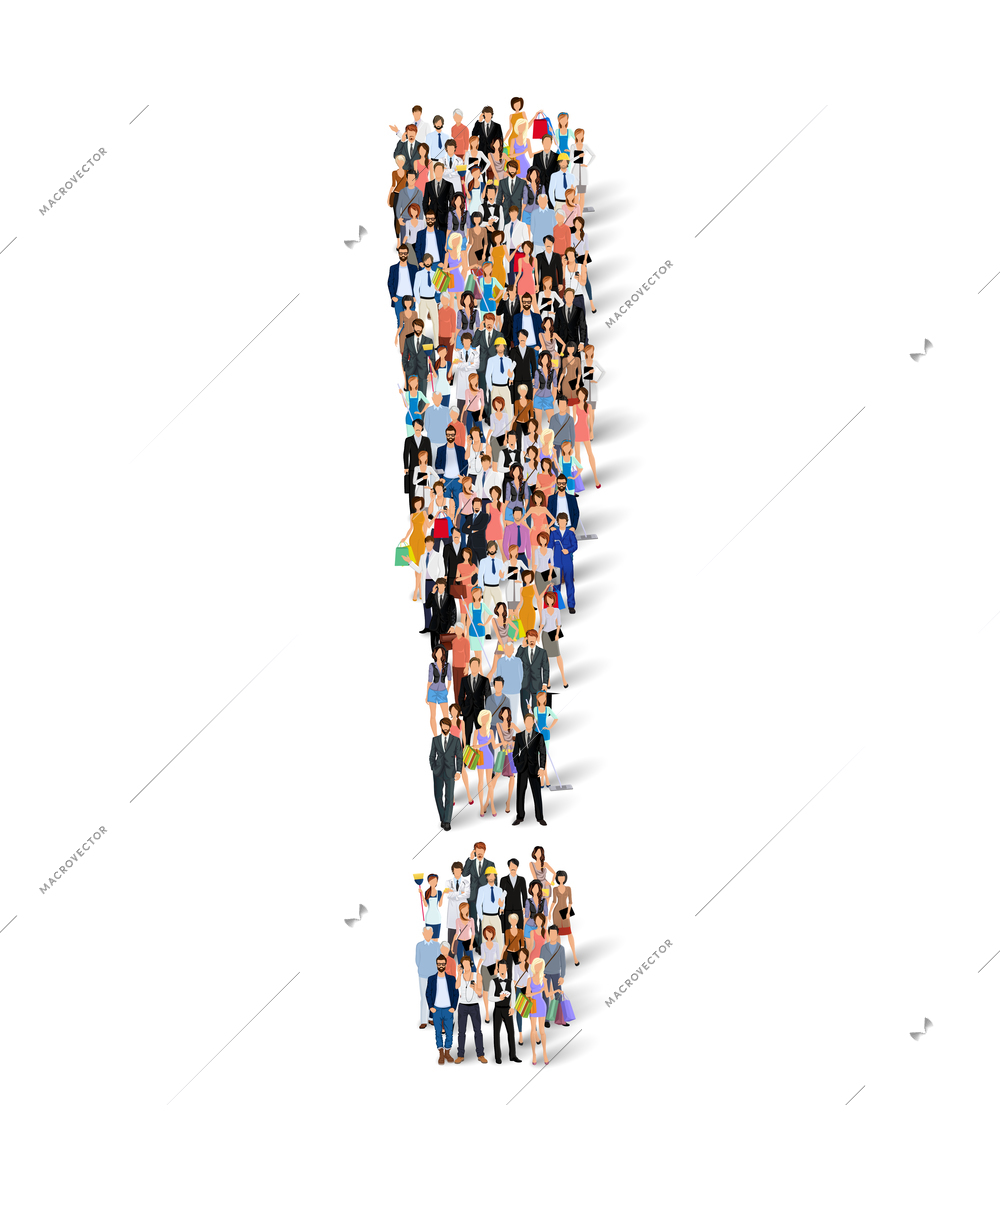 Group crowd of people in exclamation mark shape poster vector illustration